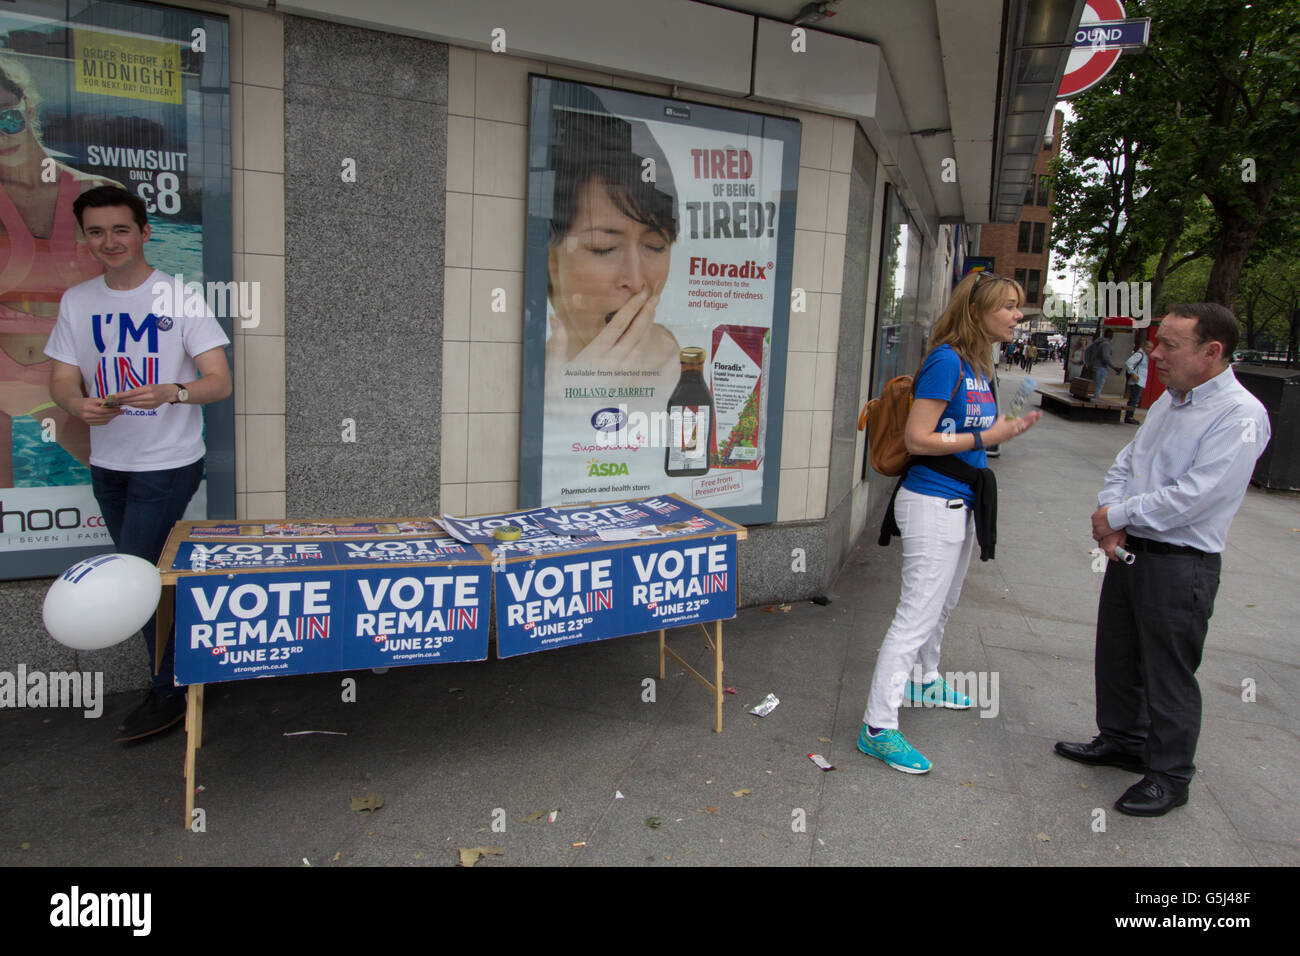 Britain stronger in Europe campaign, EU referendum Brexit, Vote Remain canvassers hand out leaflets and stickers in front of tired tiredness advert  at Warren Street in Central London, Stock Photo